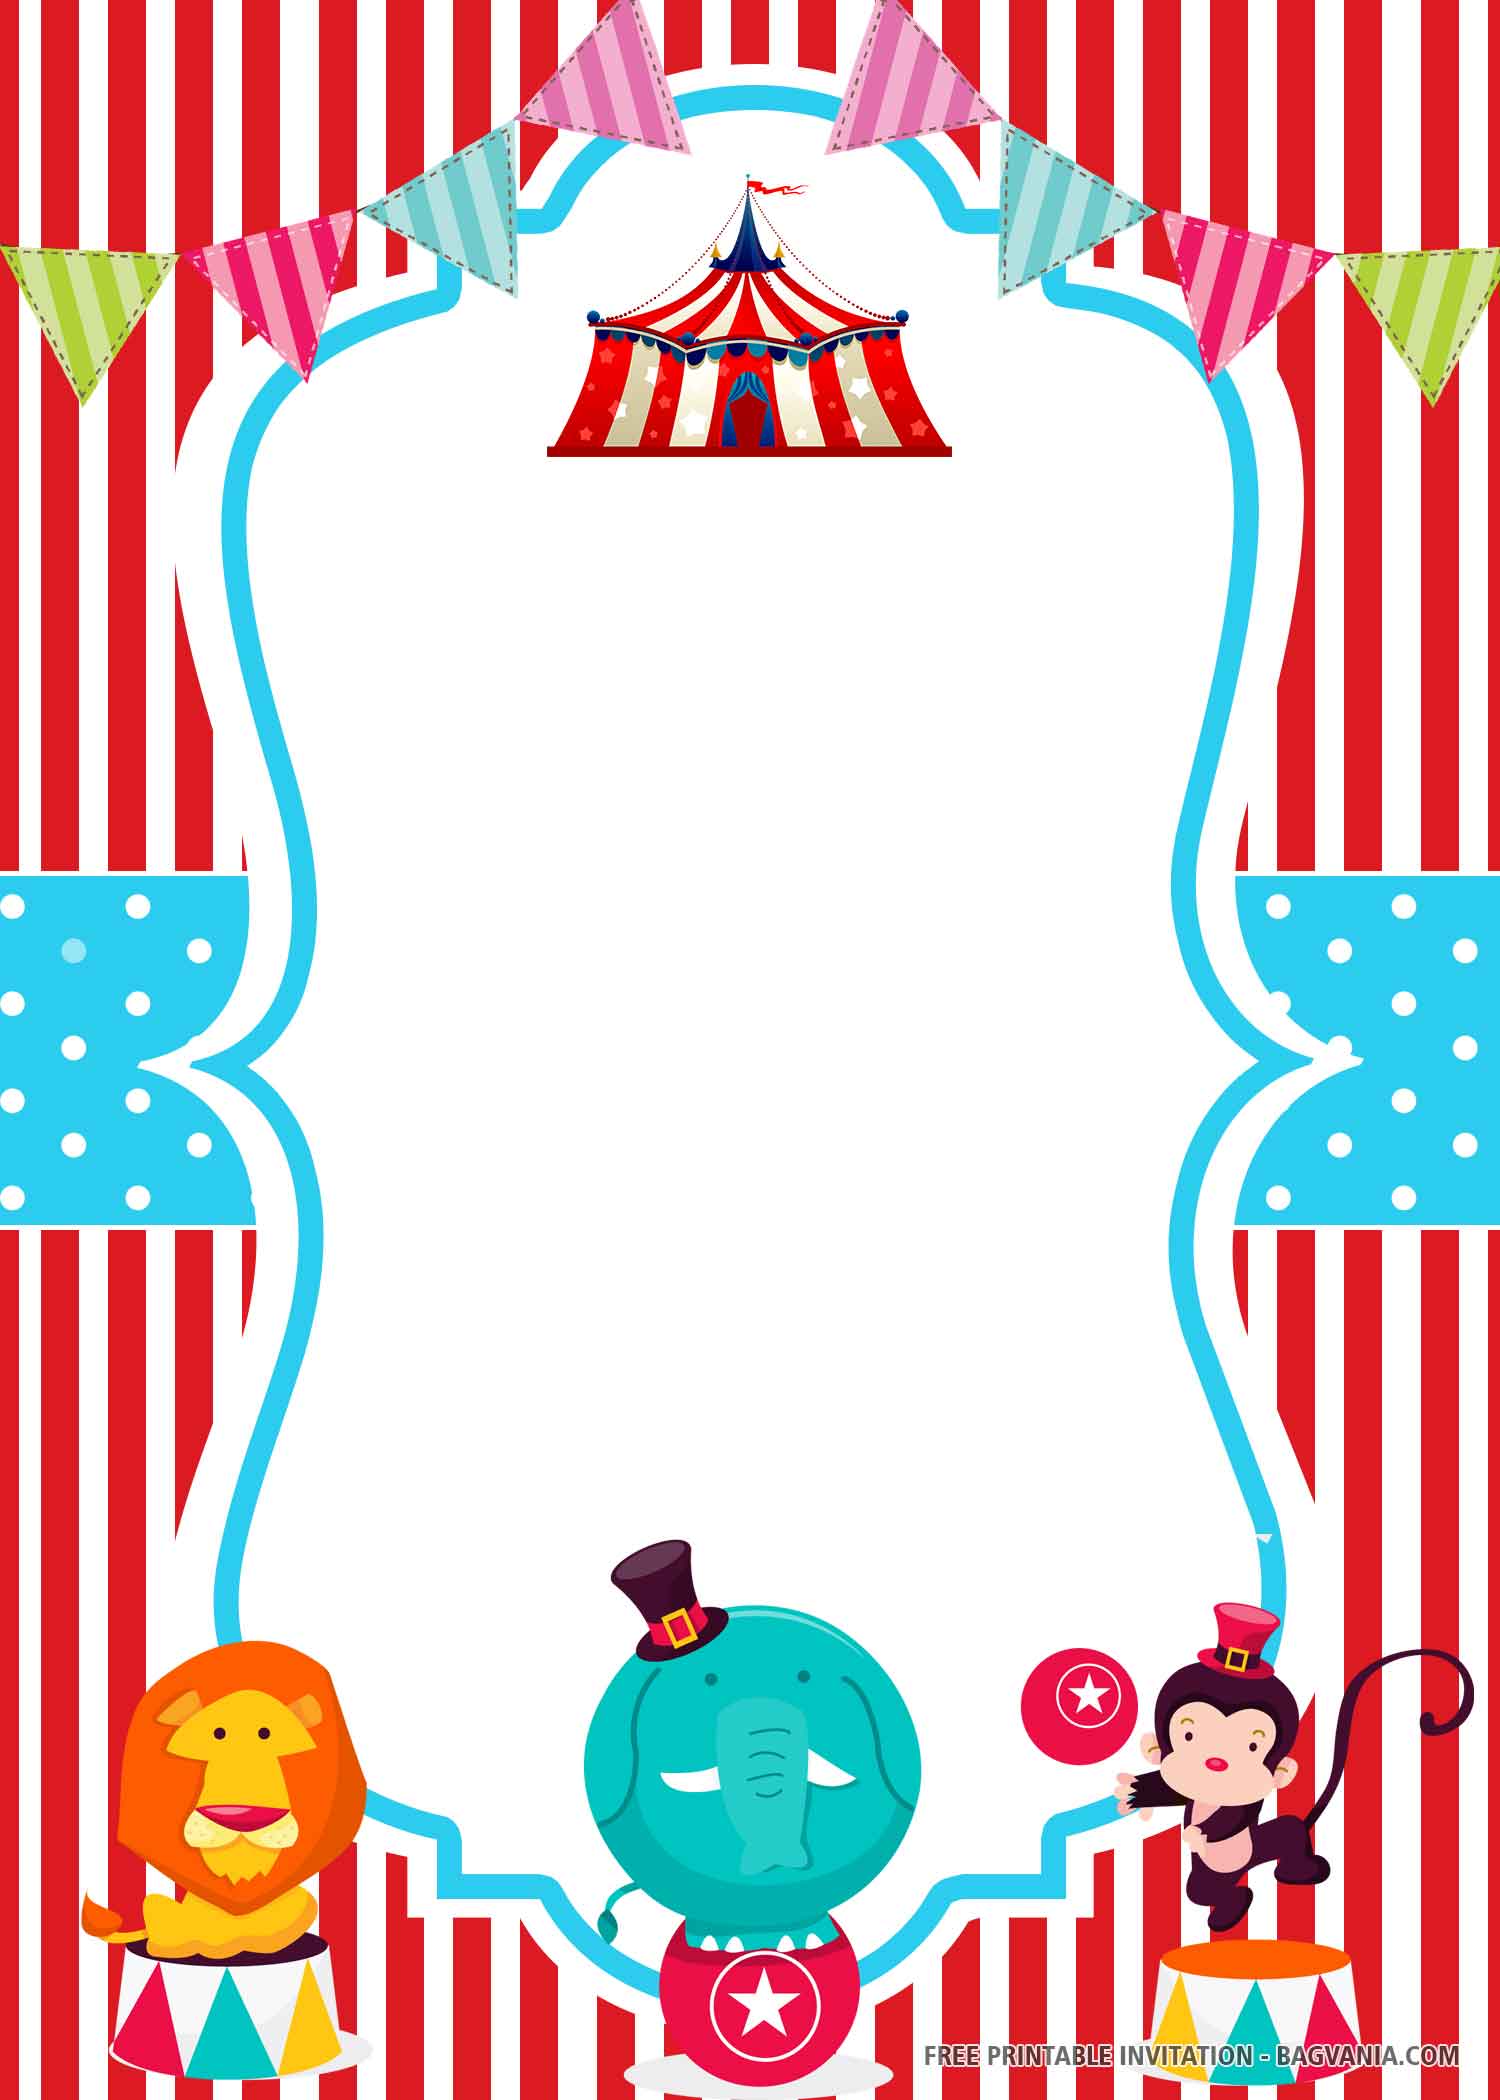 FREE Stripes Circus with Tent, Ribbons, and Animals